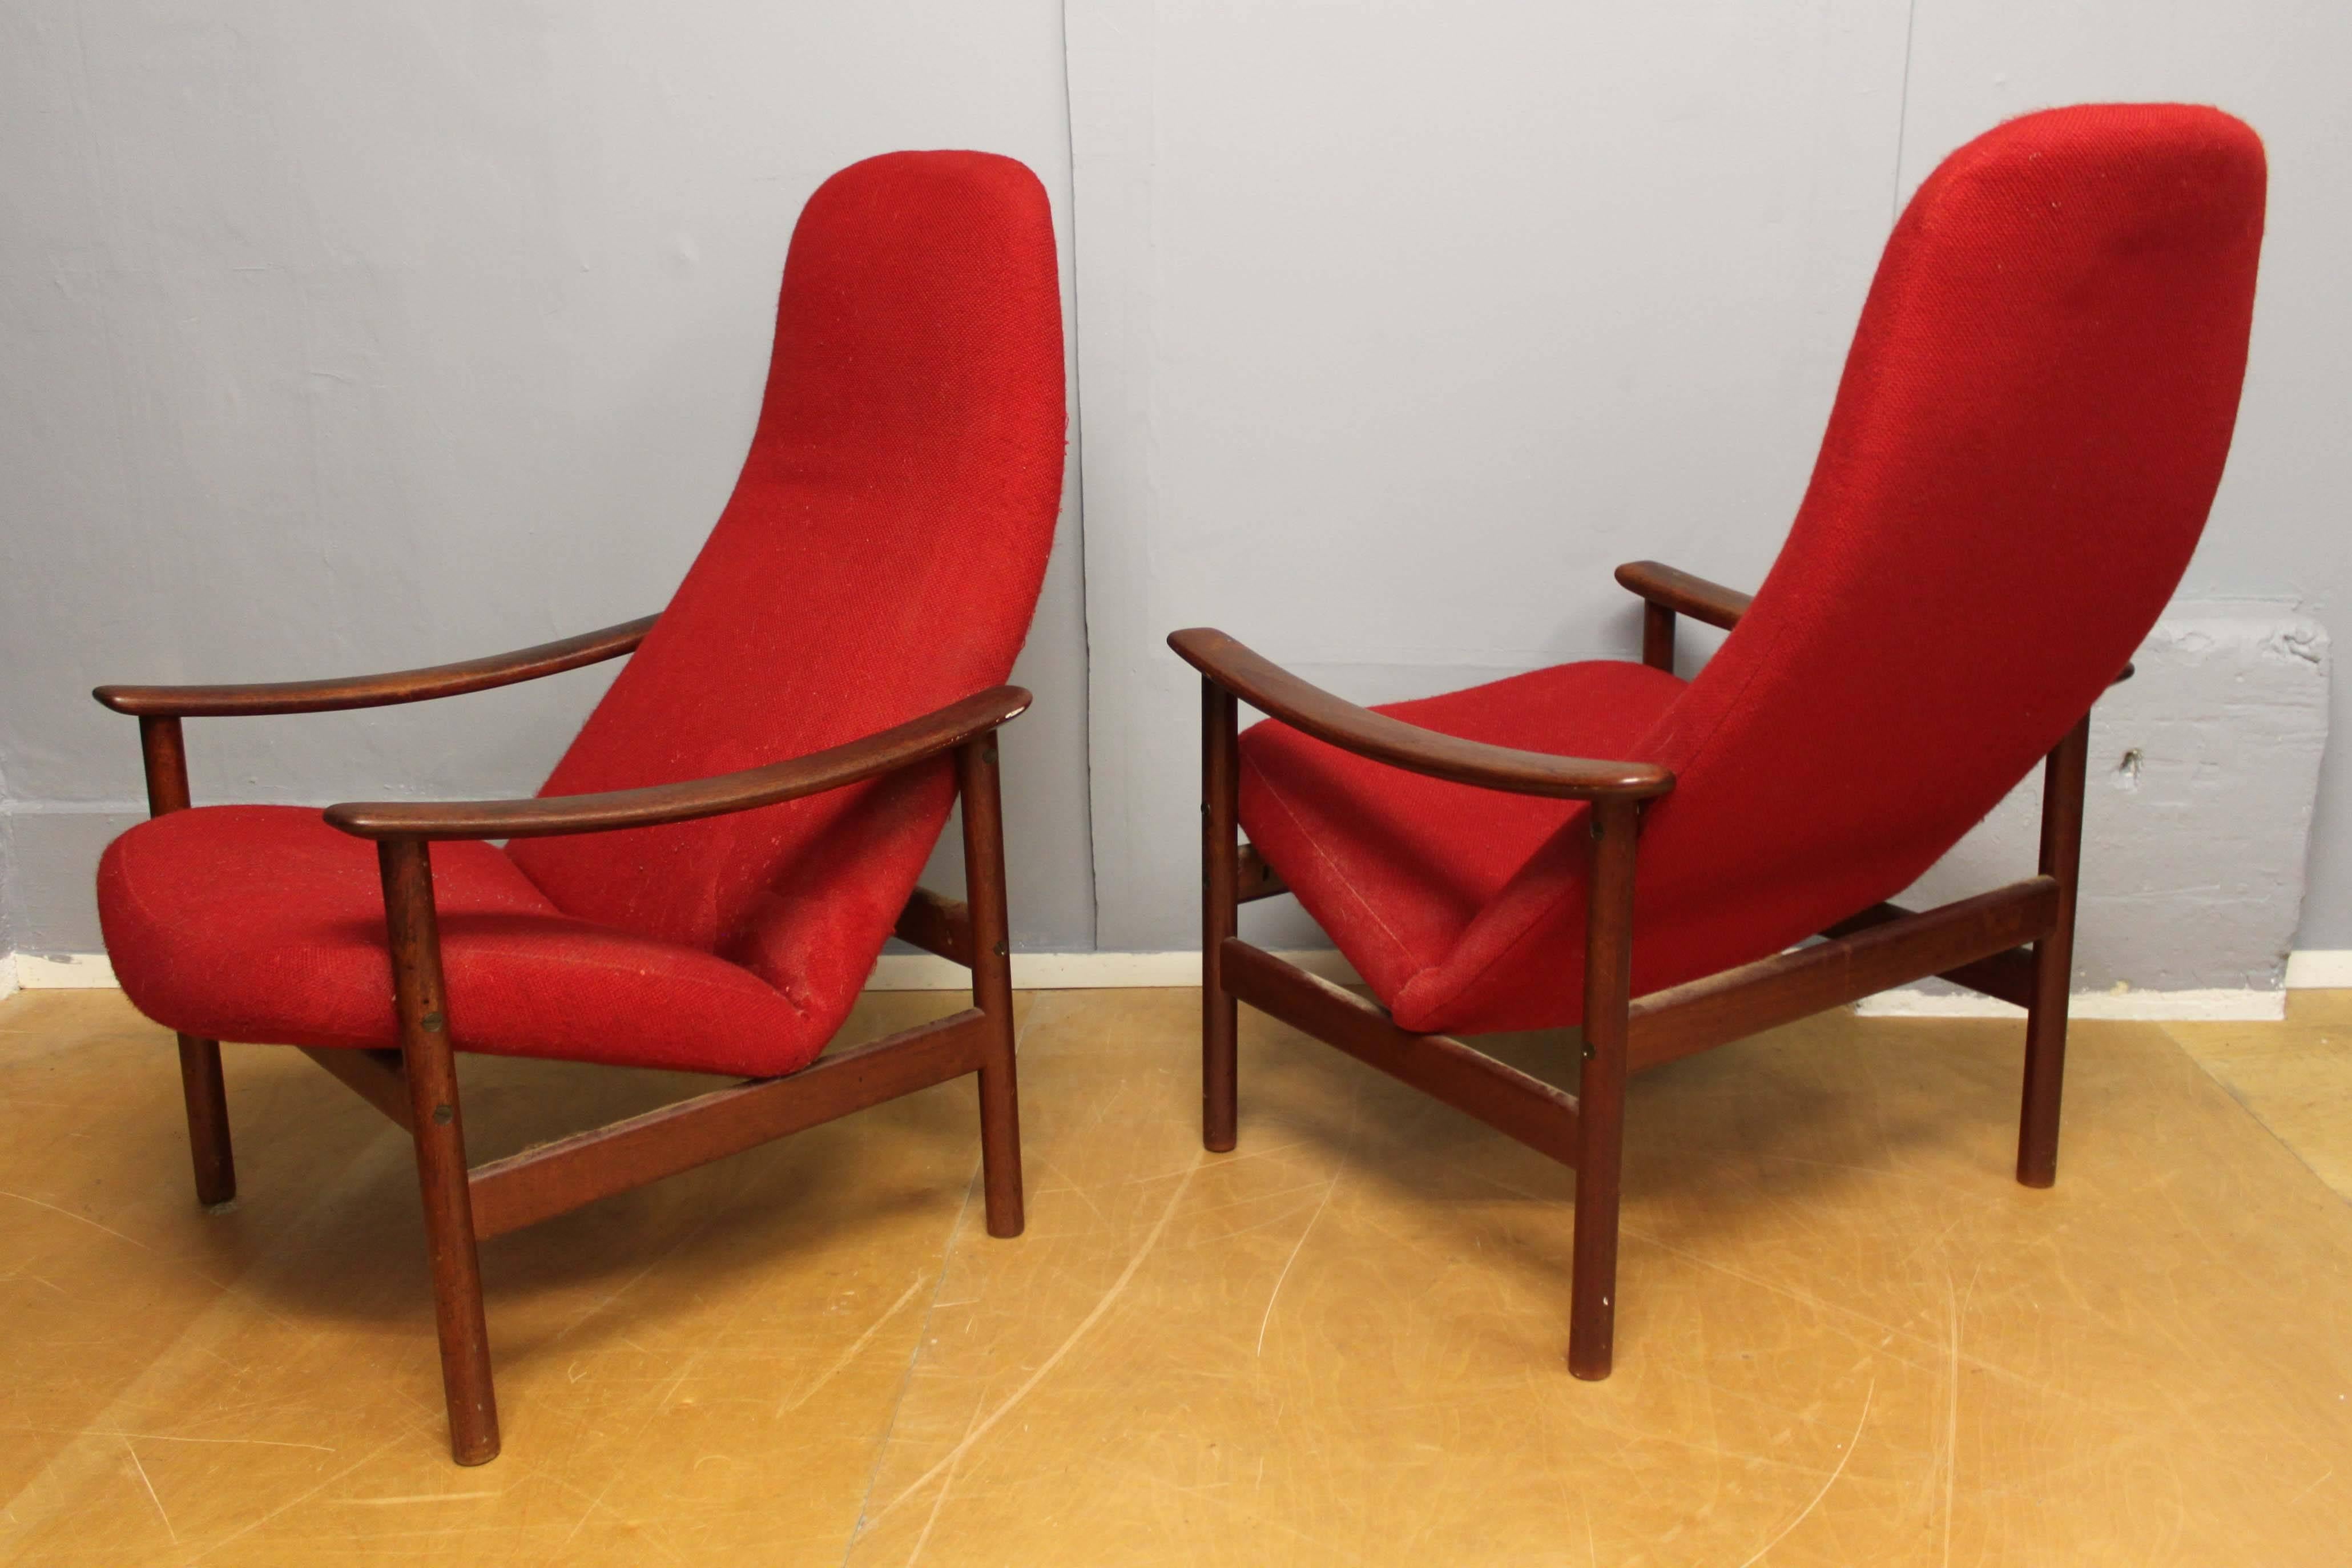 Adjustable contour chairs by Alf Svensson for Ljungs Industrier AB, Sweden. Very comfortable, original label at the bottom of the seat. 

Vintage condition, likely will need reupholstery.